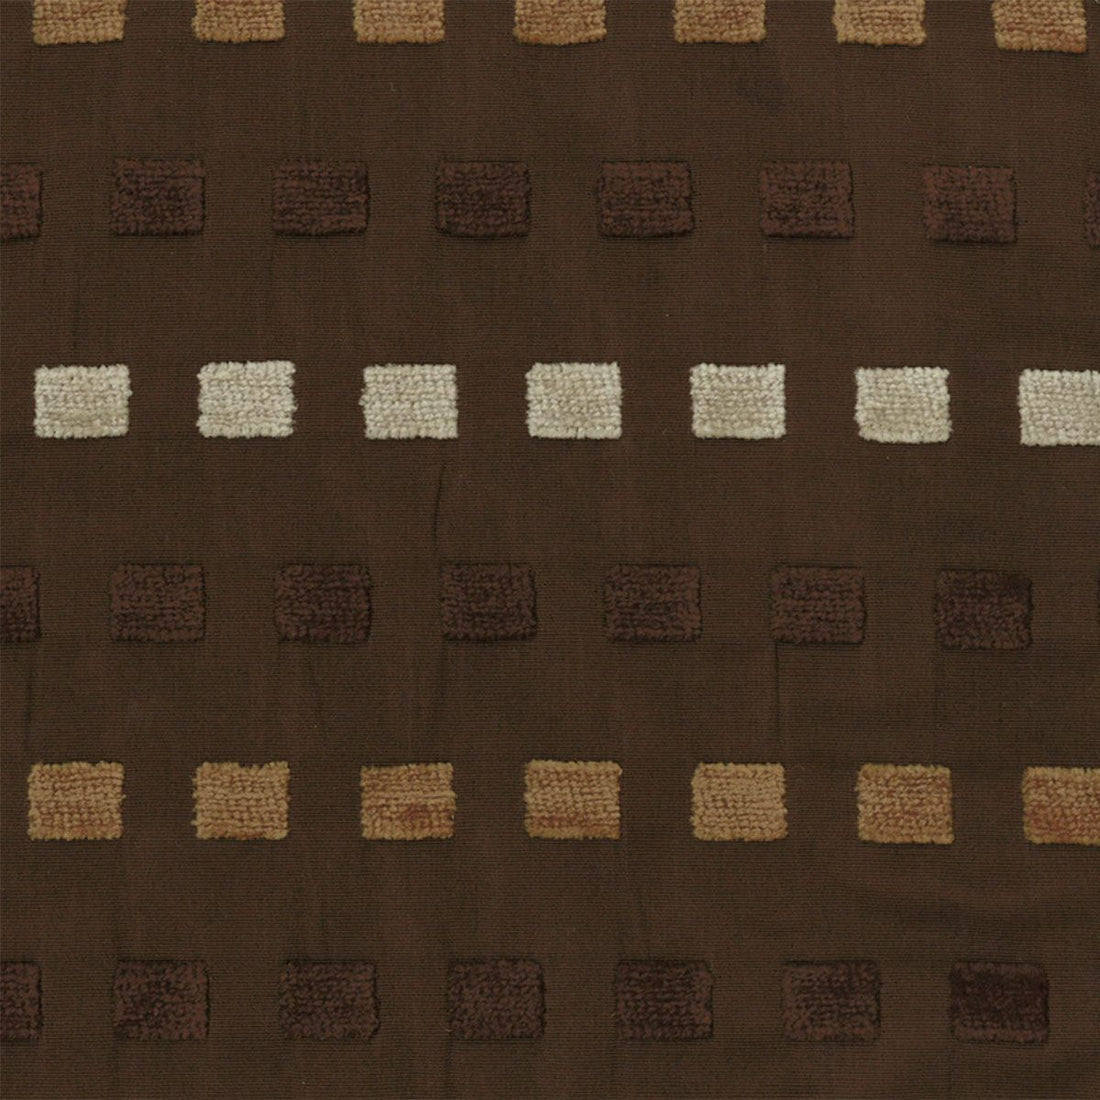 Wicklow fabric in espresso color - pattern number VX 00607245 - by Scalamandre in the Old World Weavers collection